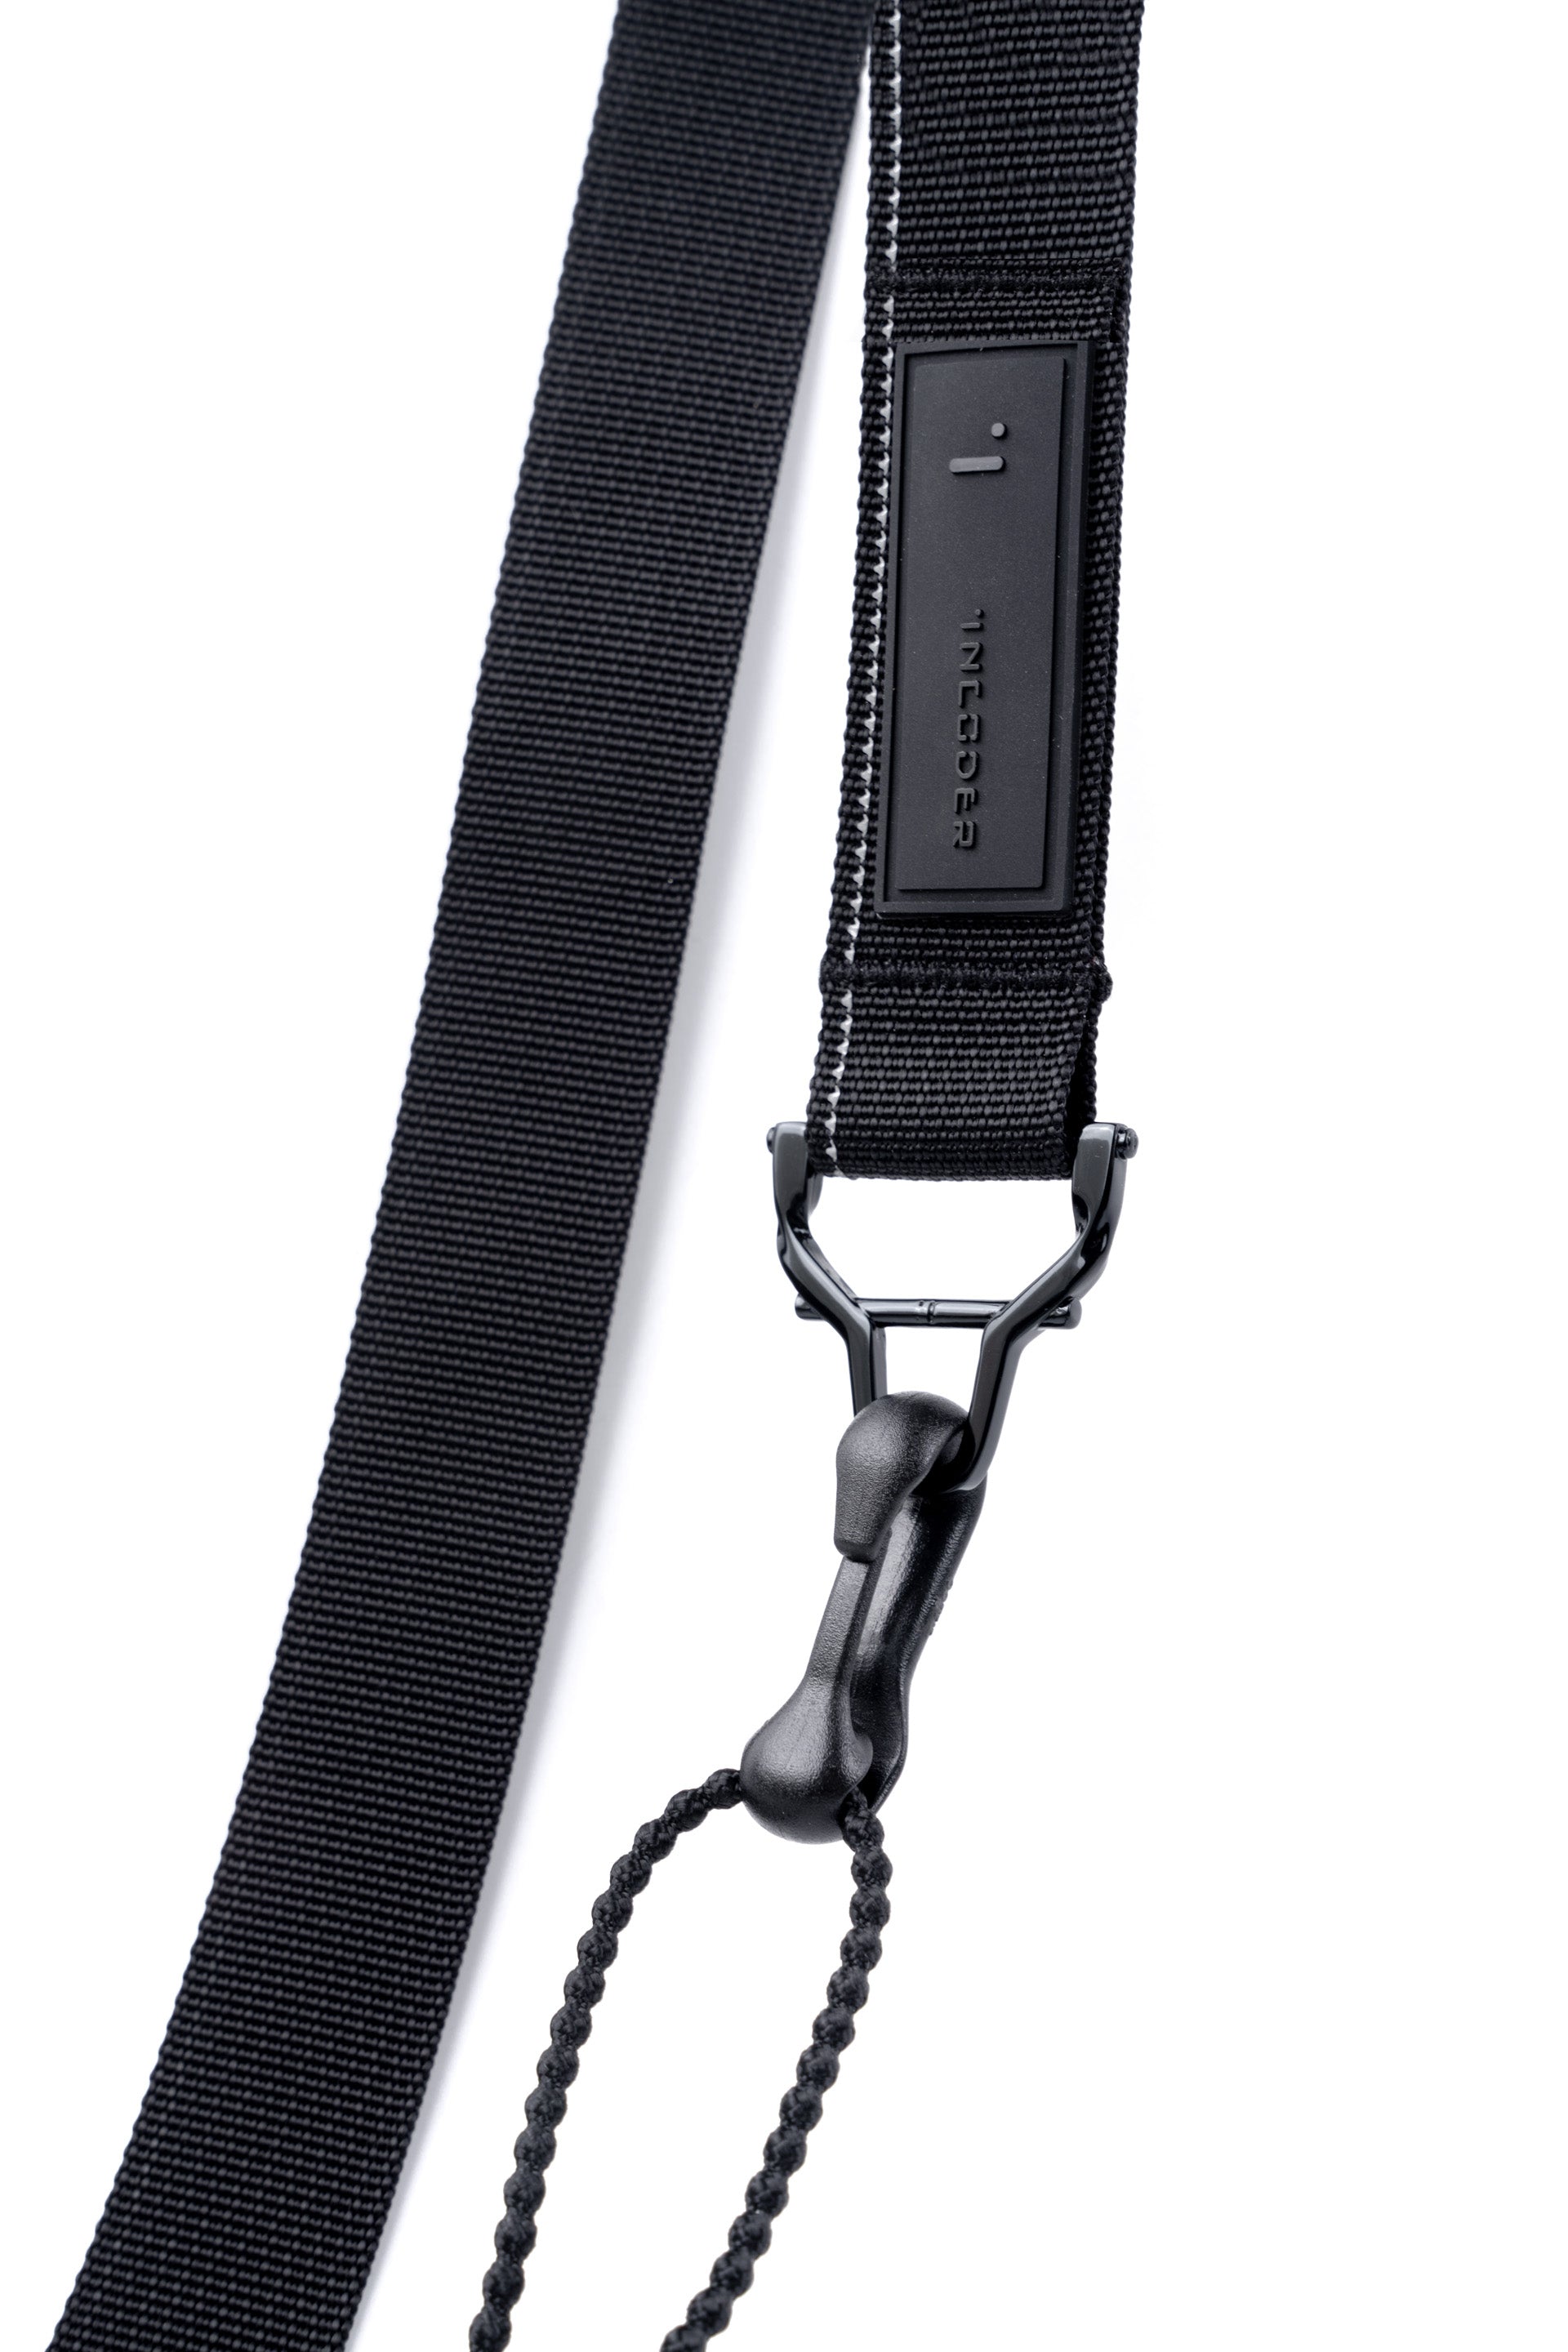 iN Wide Strap+Strap Adapter